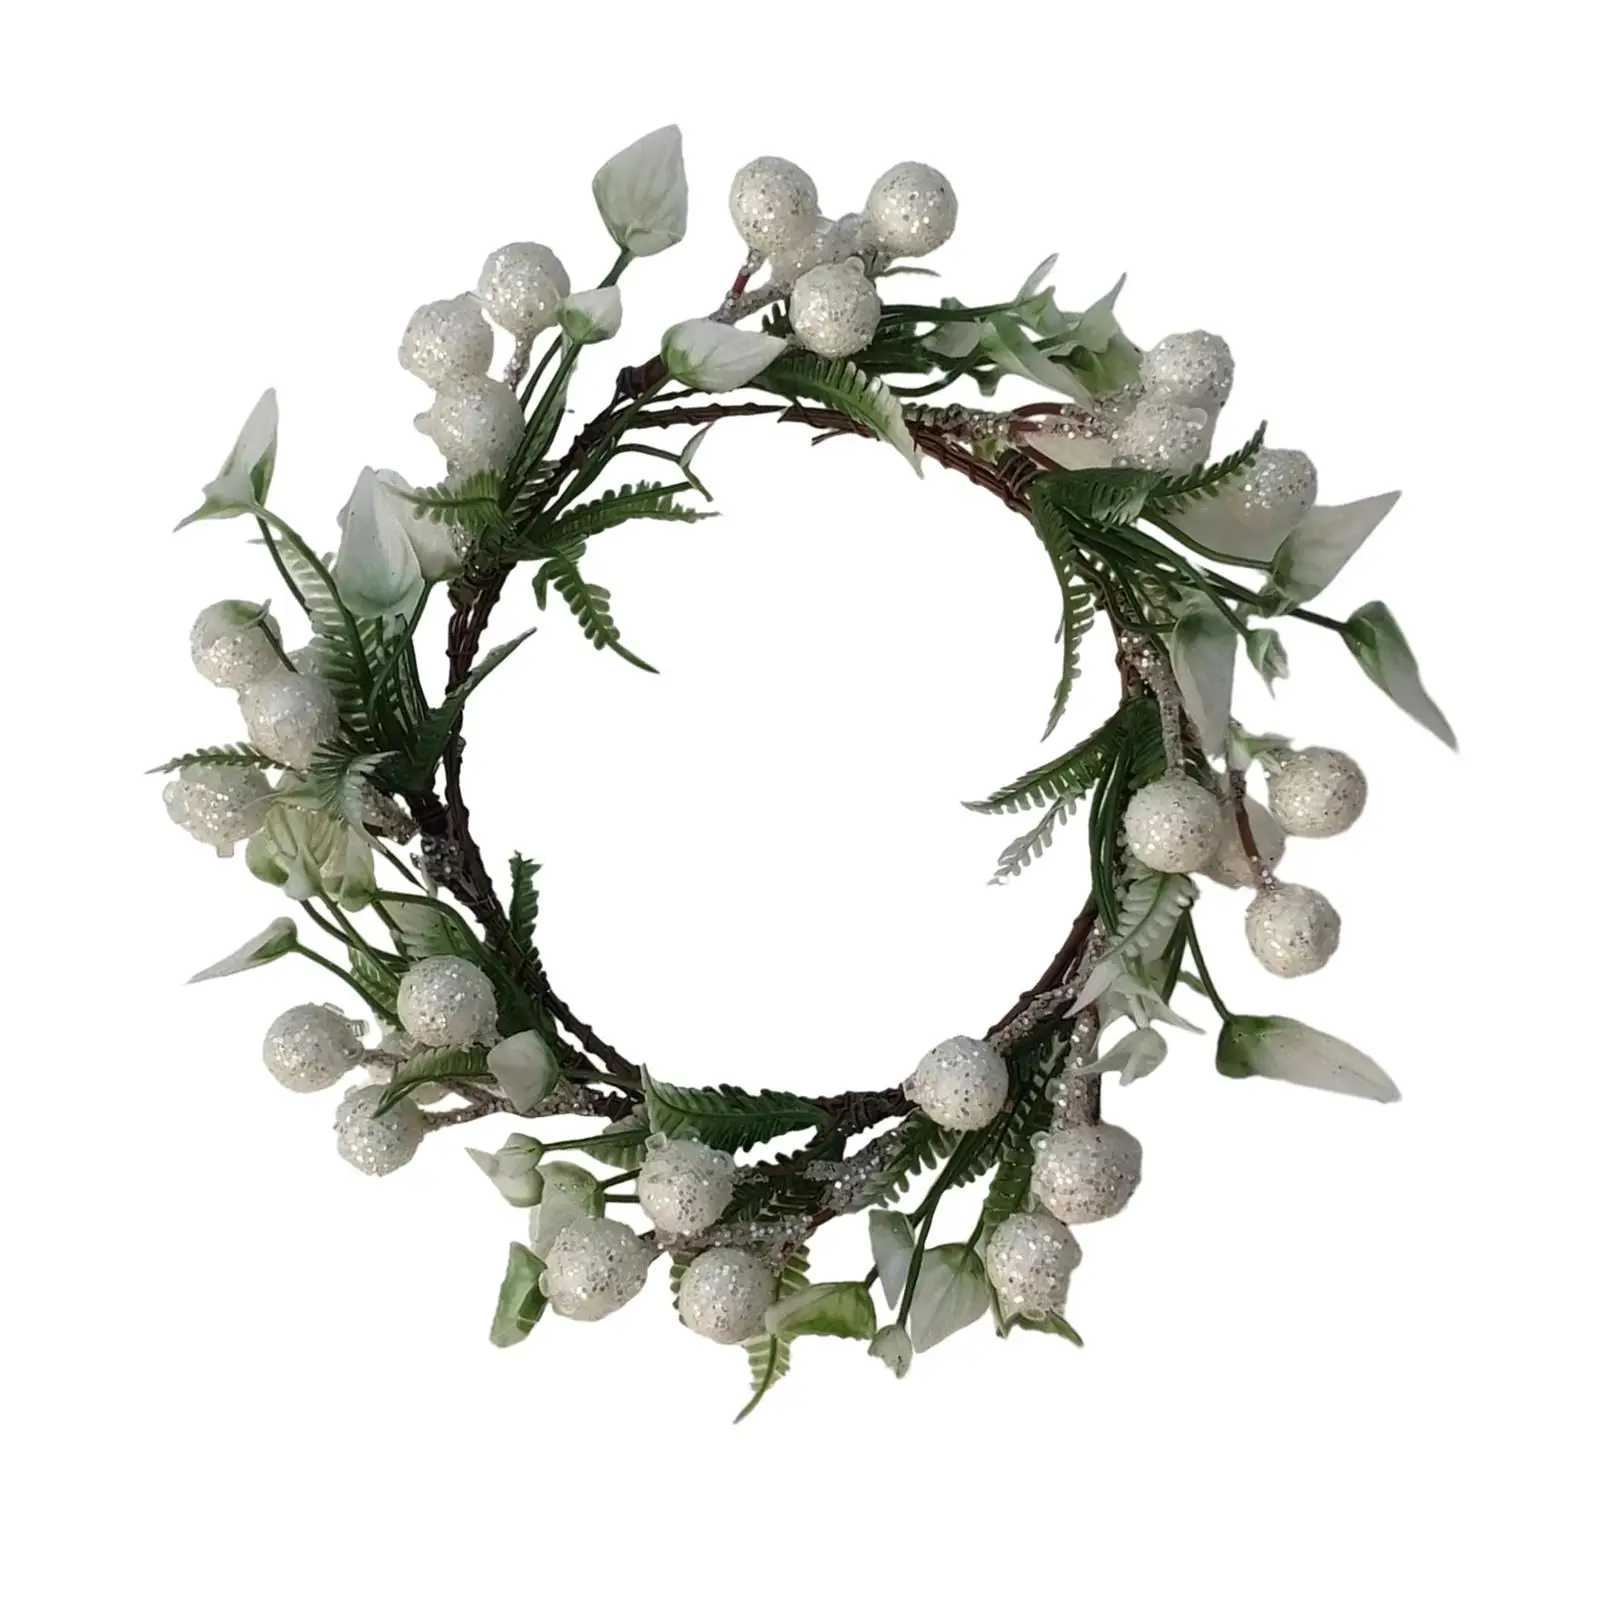 Candle Garland Ring Christmas Decoration Ornament Holiday Party Decor Artificial Christmas Wreath for Window Indoor Home Decor